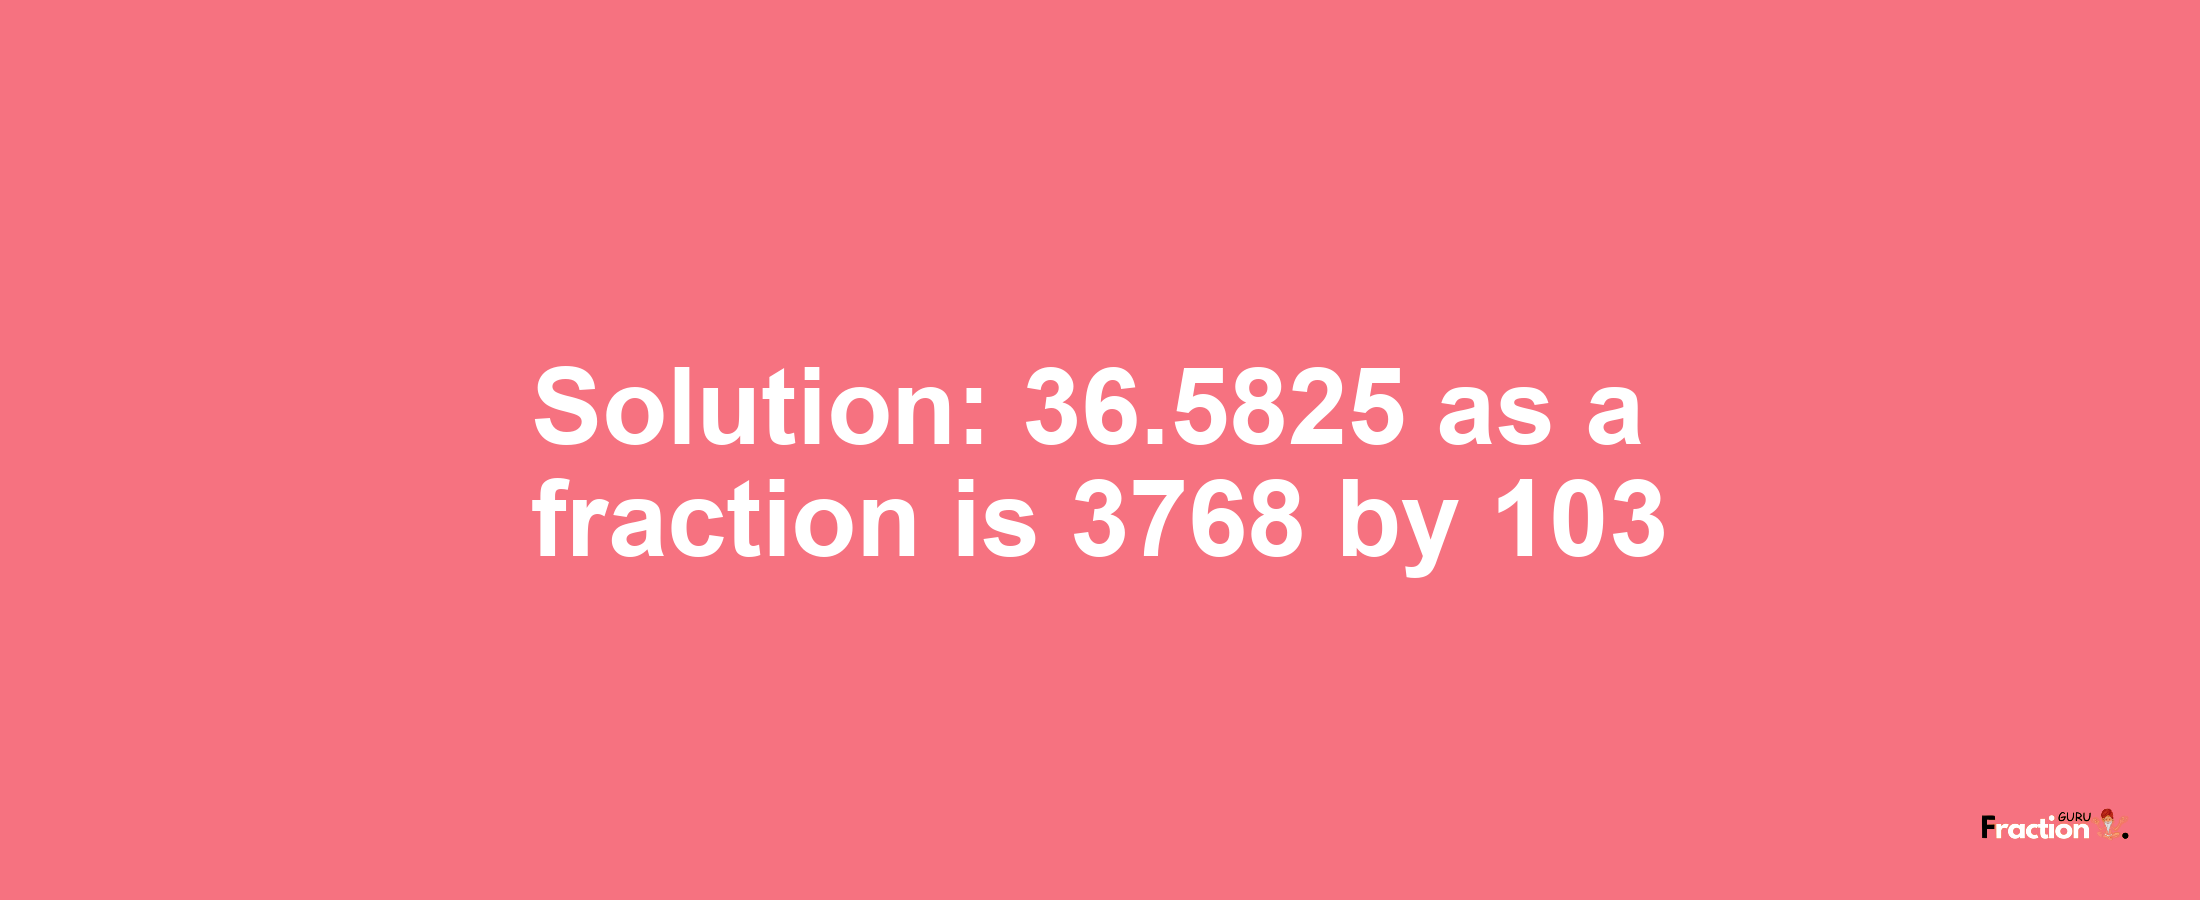 Solution:36.5825 as a fraction is 3768/103